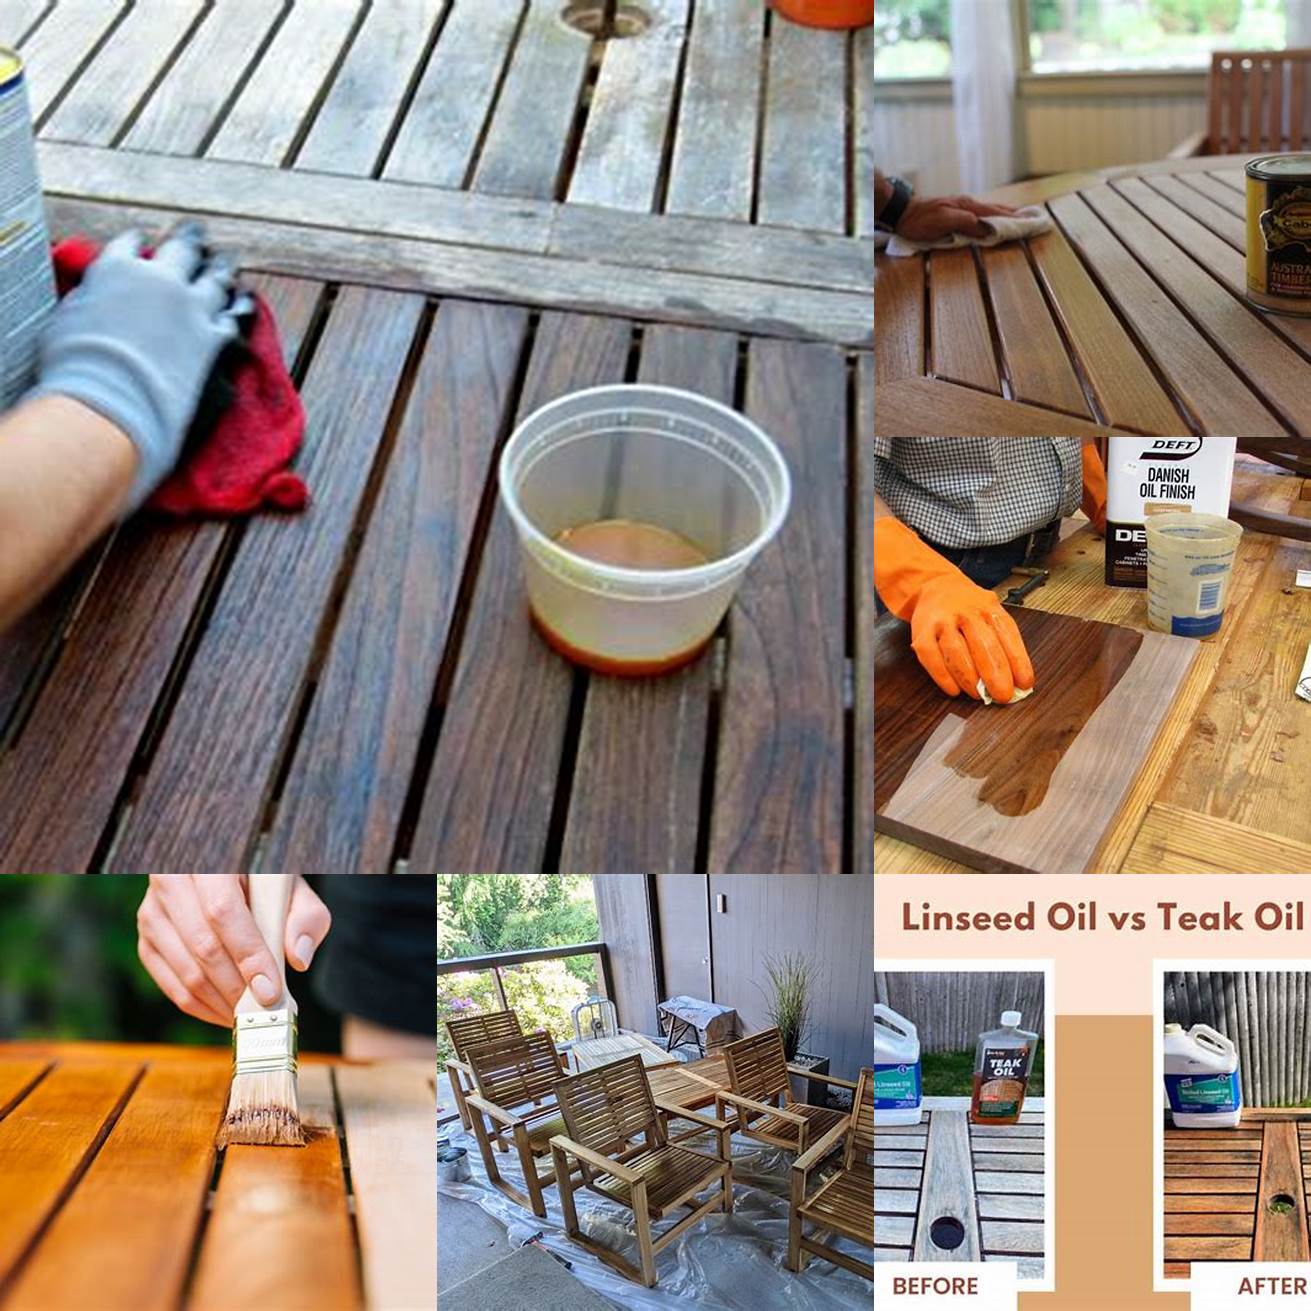 Allow the teak oil to dry before using the wood